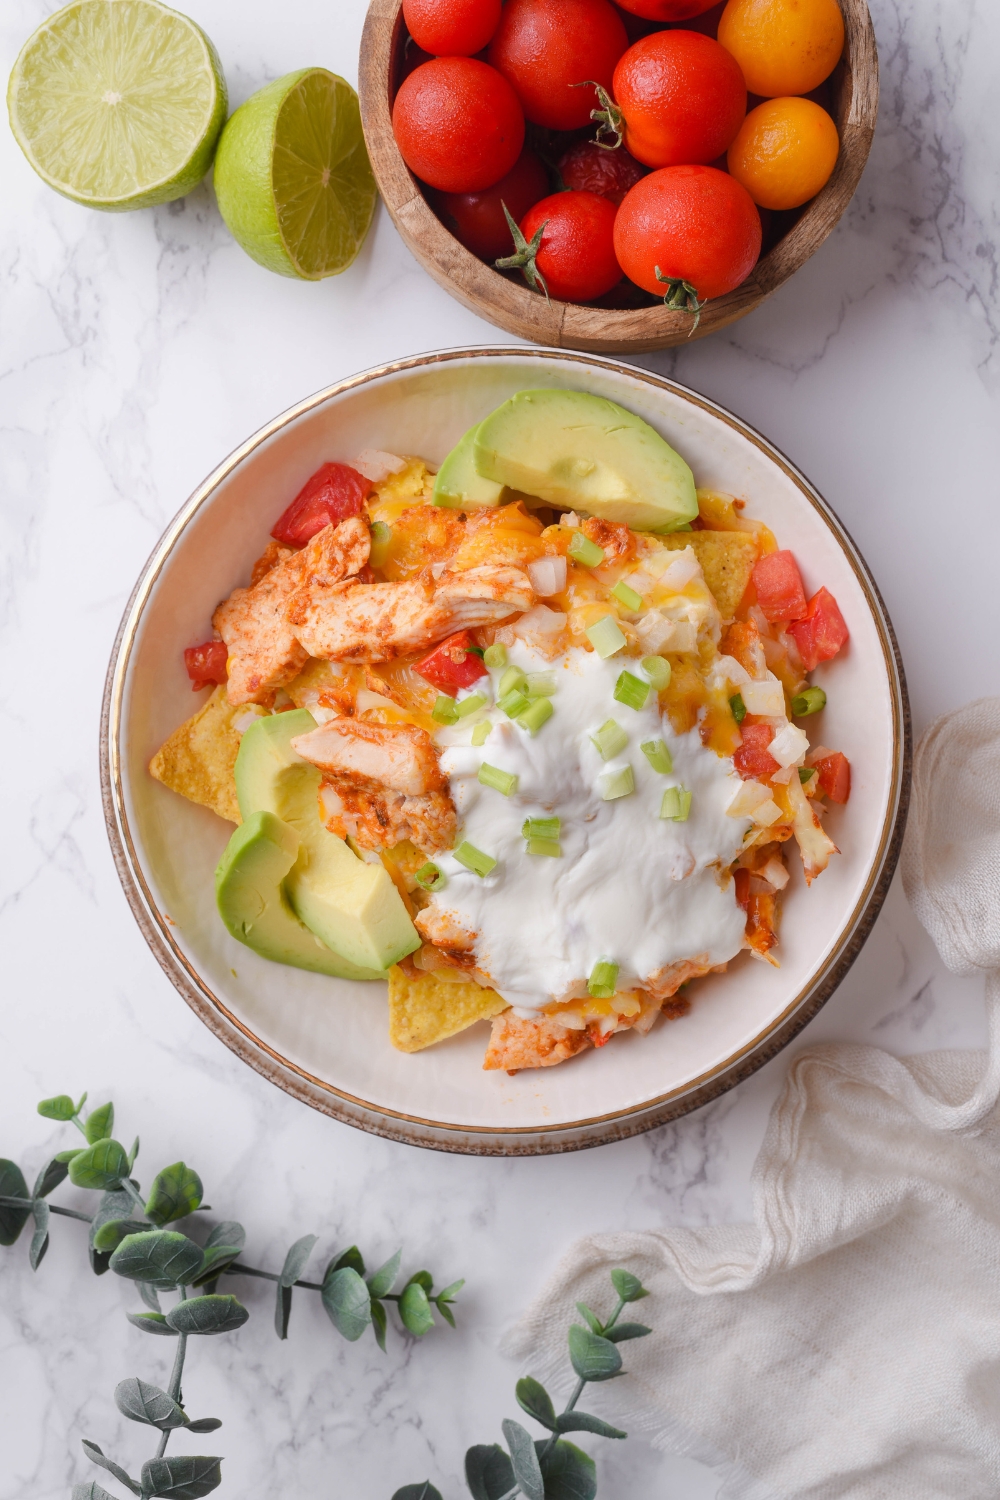 A bowl of chicken nachos covered in queso sauce, garnished with pico de gallo and green onions, with sliced avocado on the side.